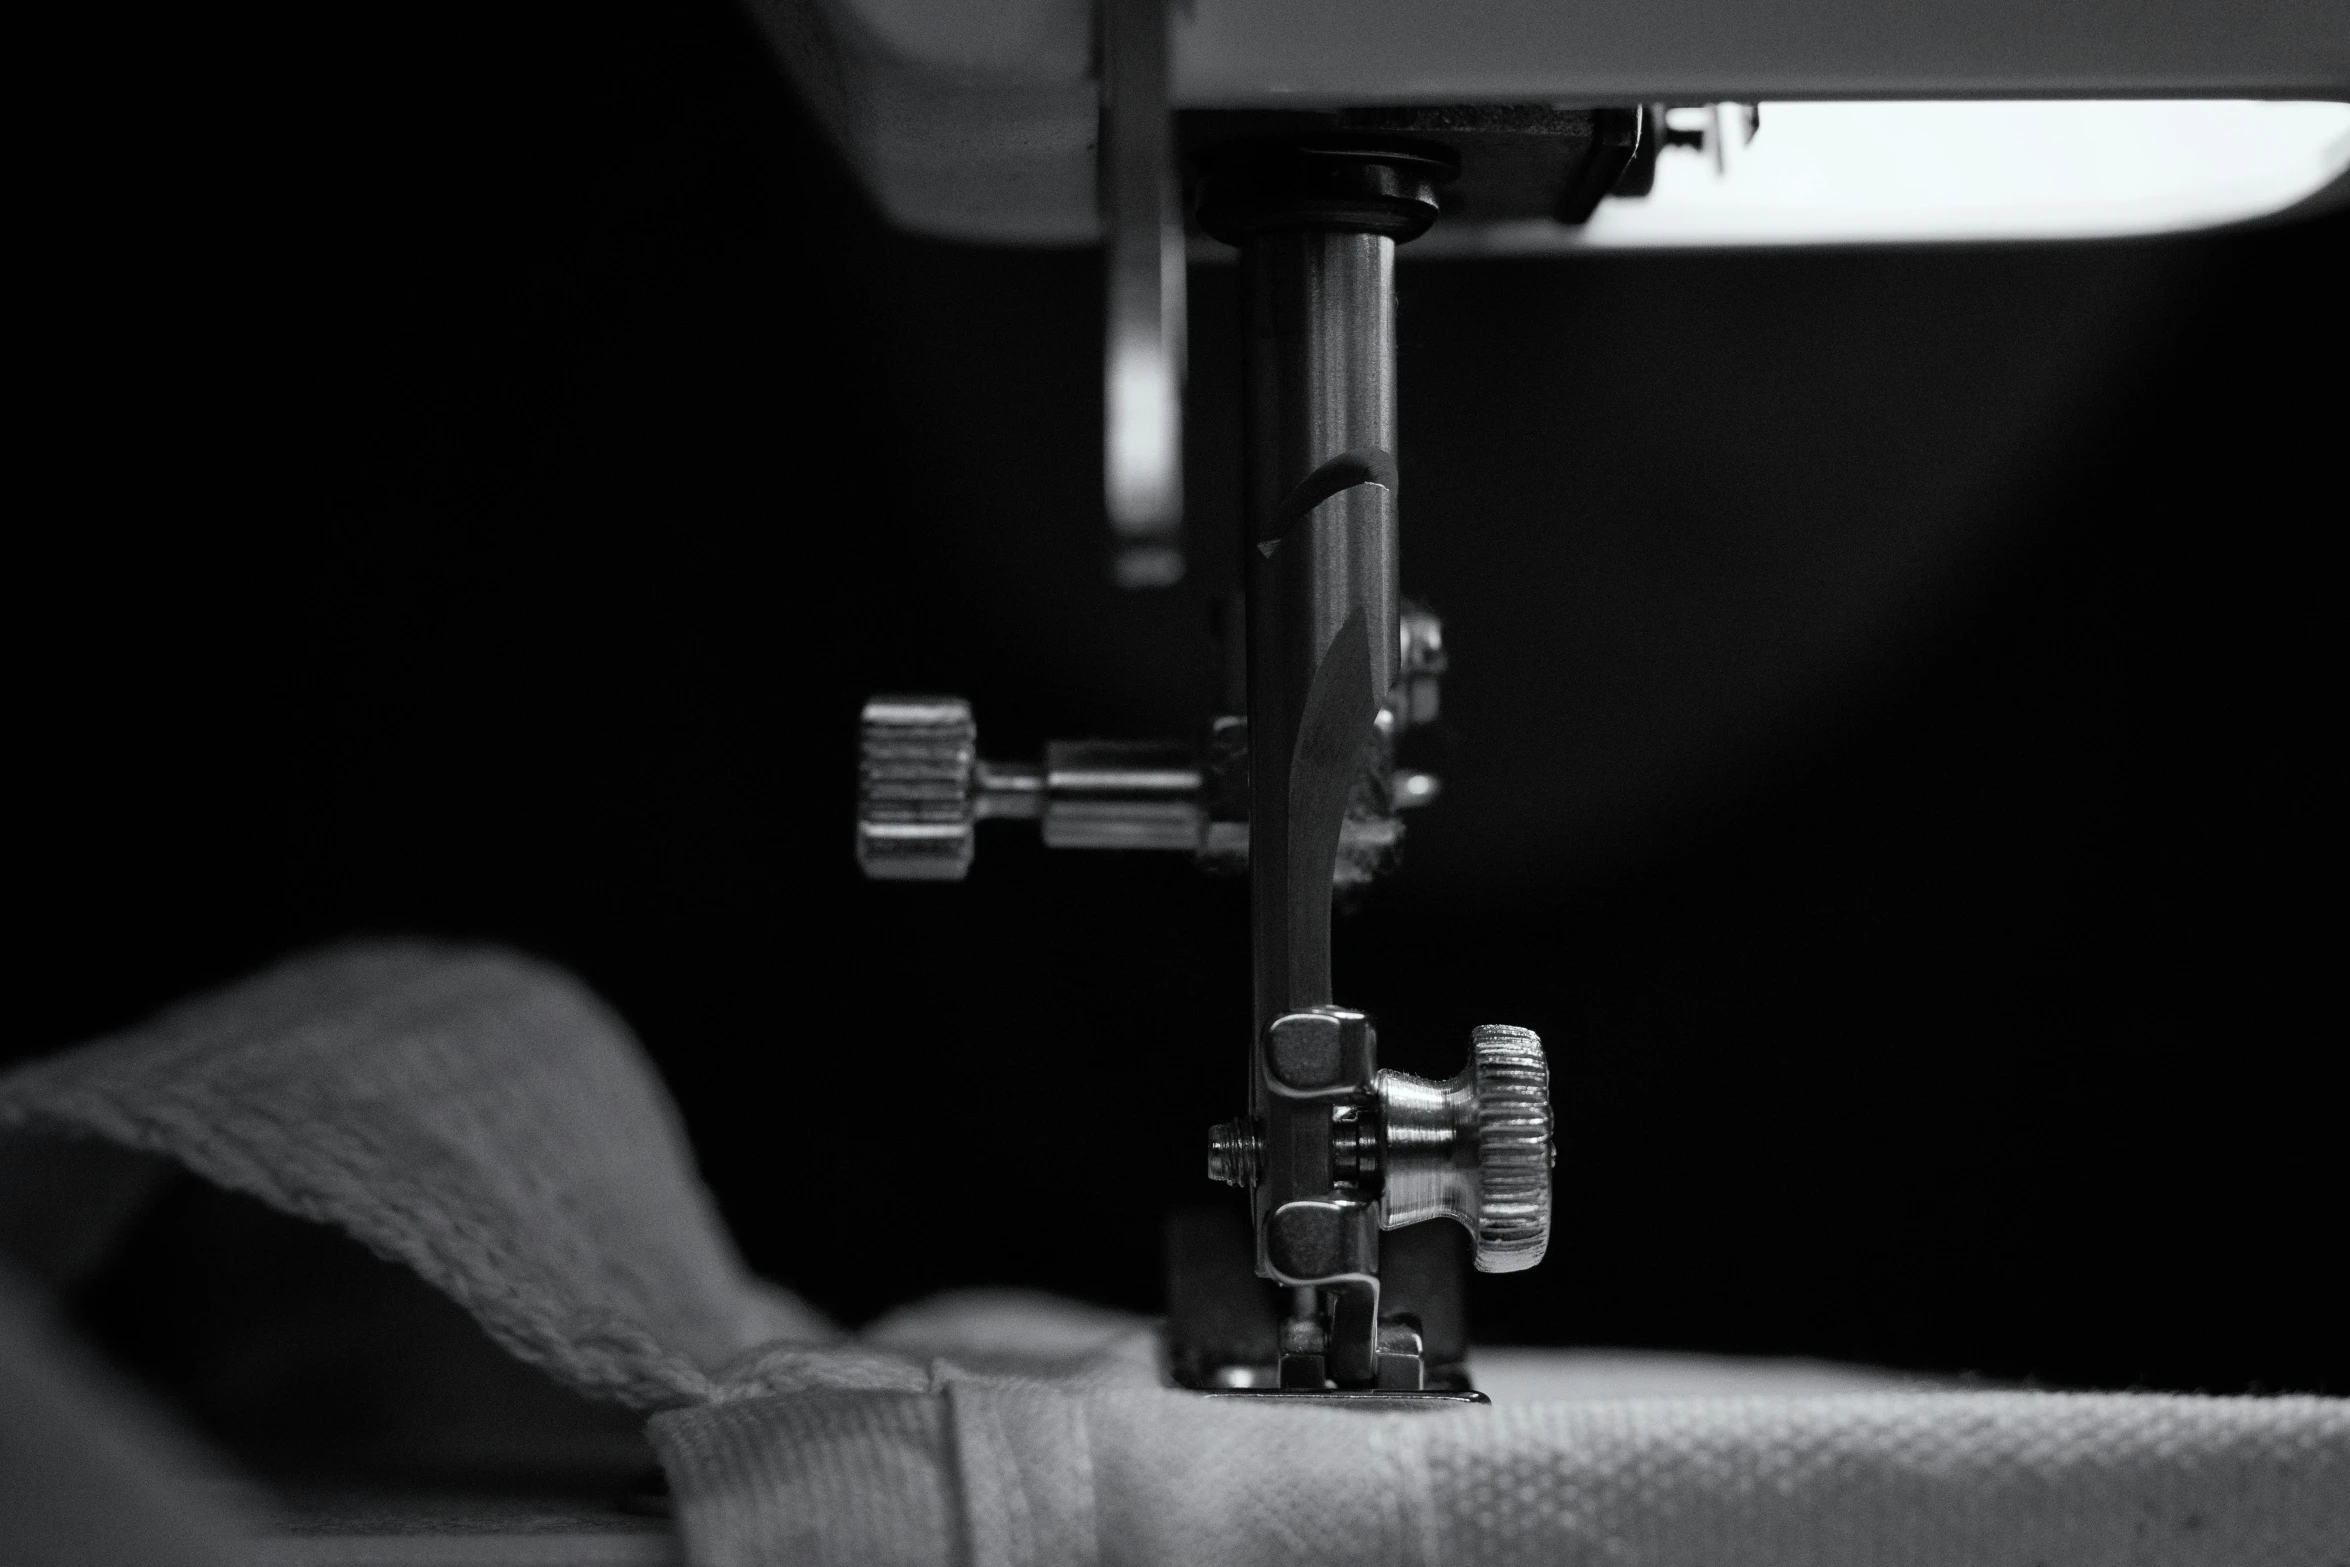 a machine stitching soing with several needles